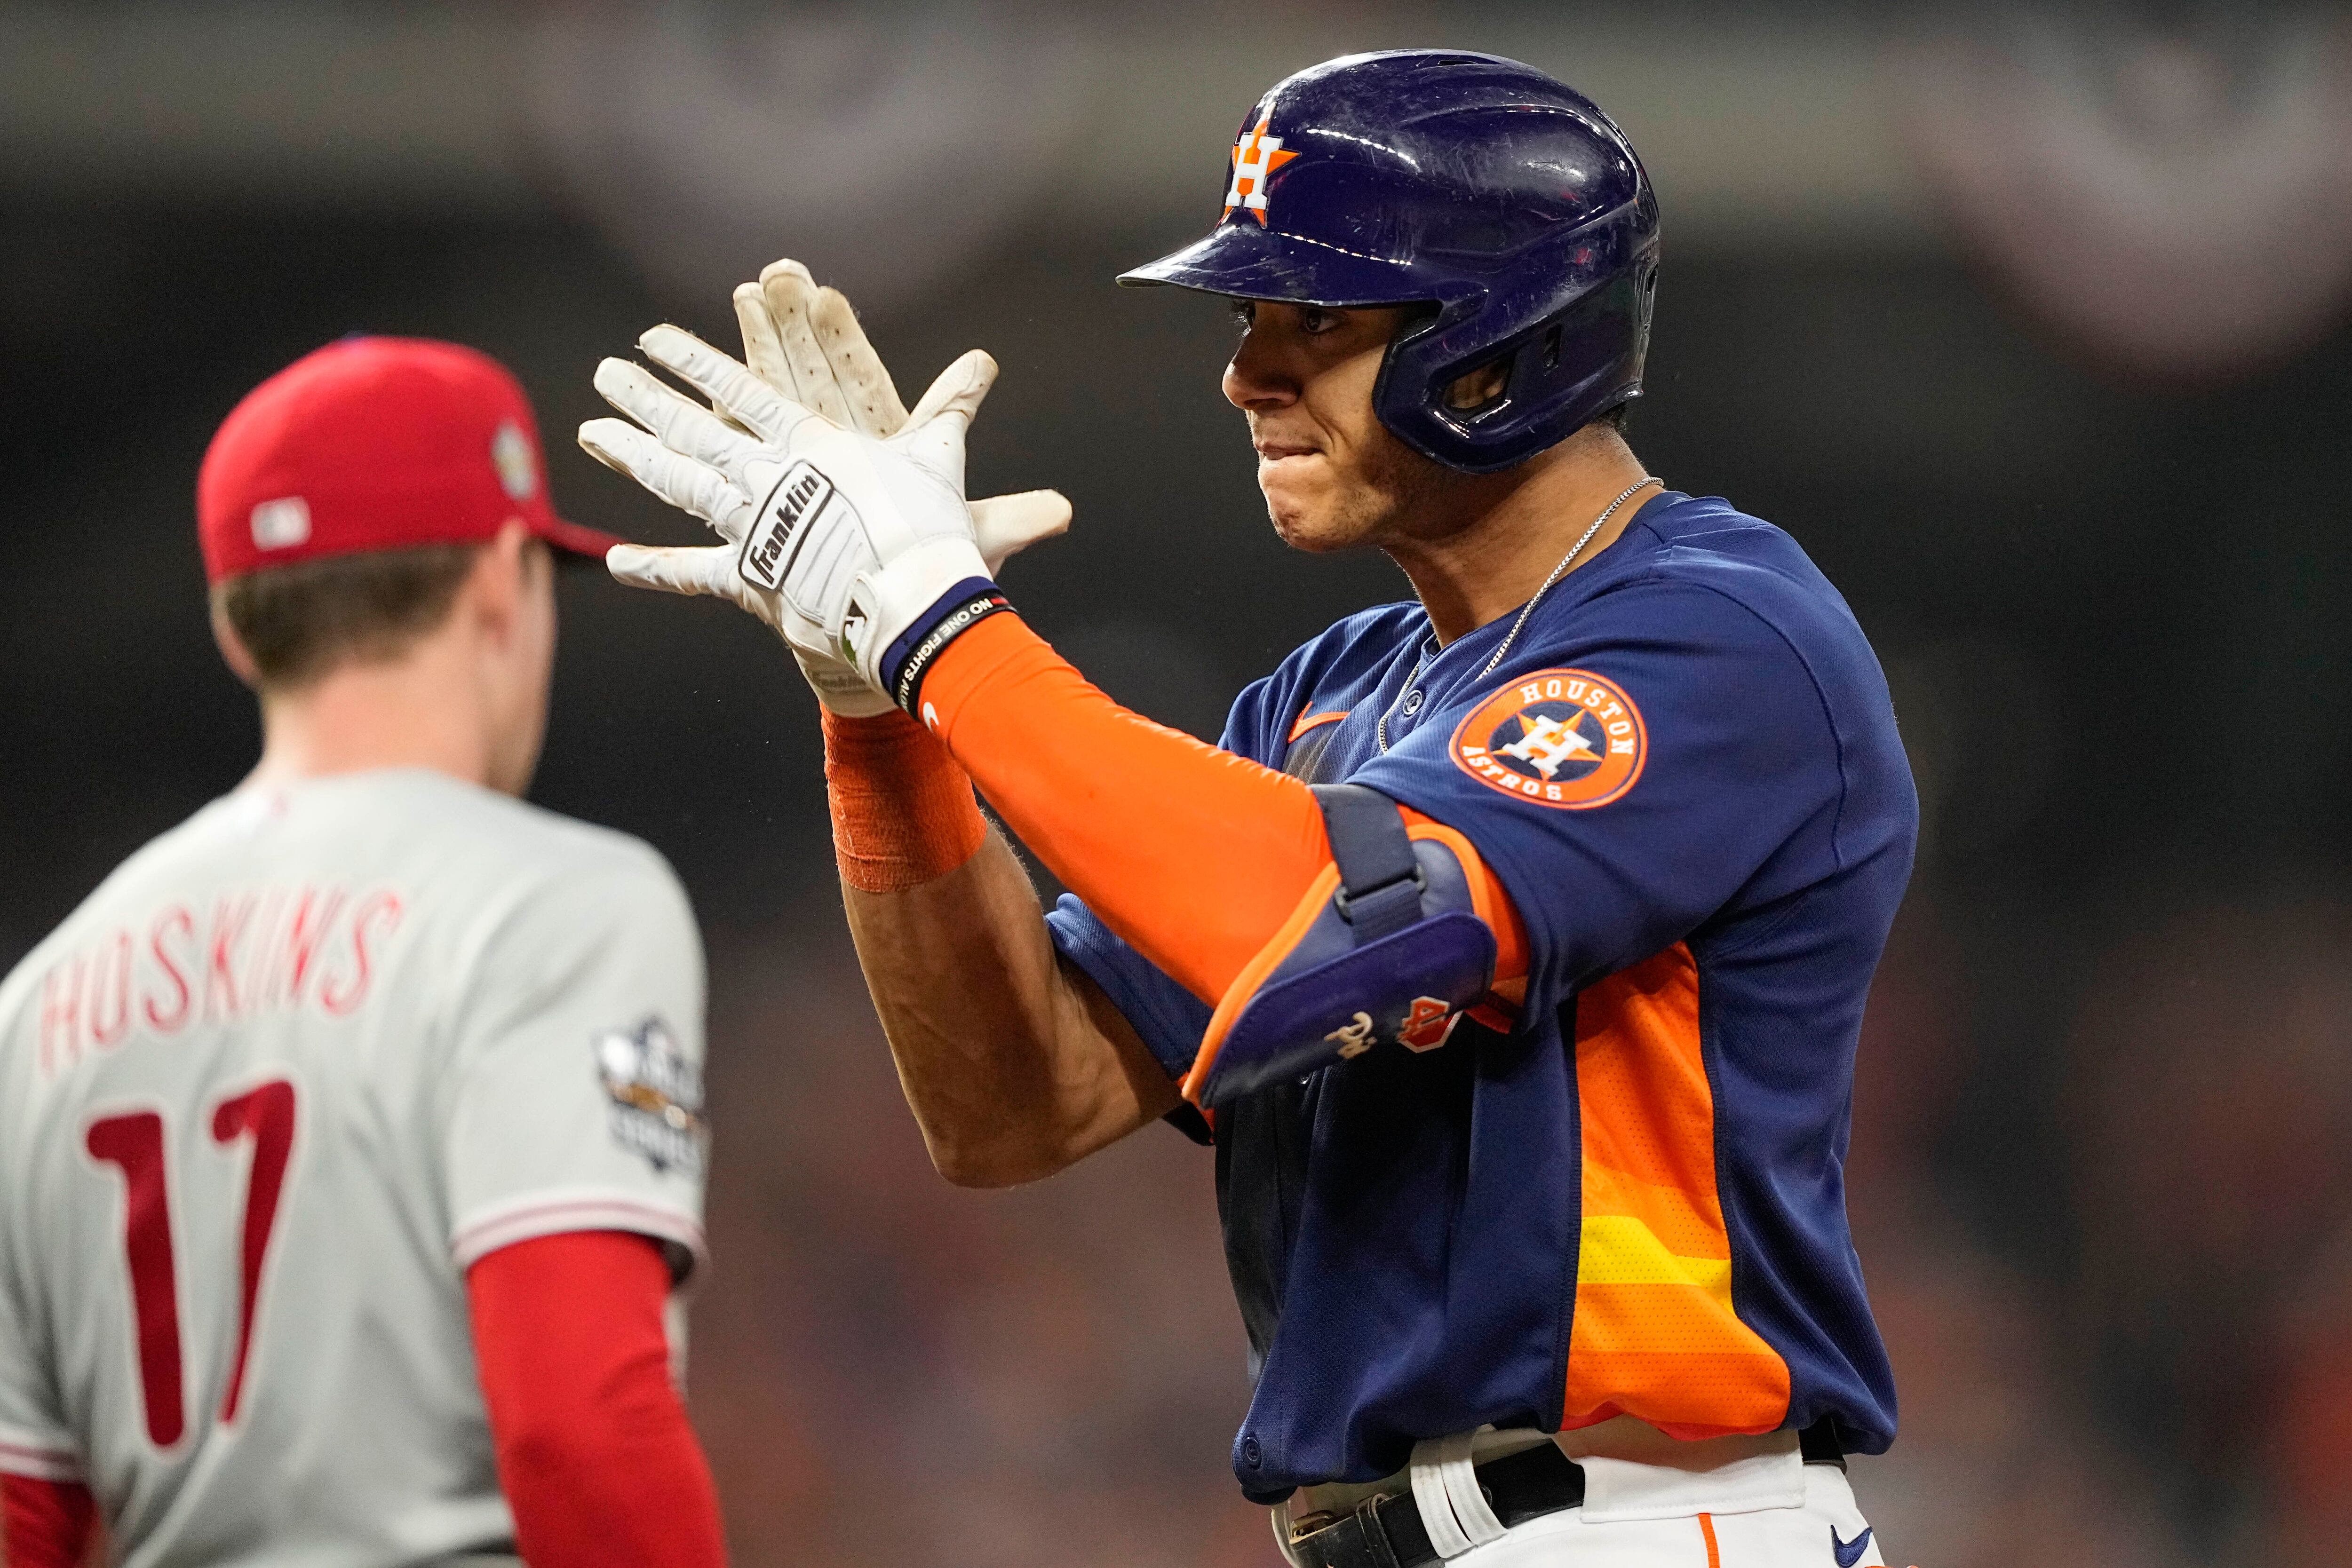 Astros rookie star Peña delivers again in World Series win – The